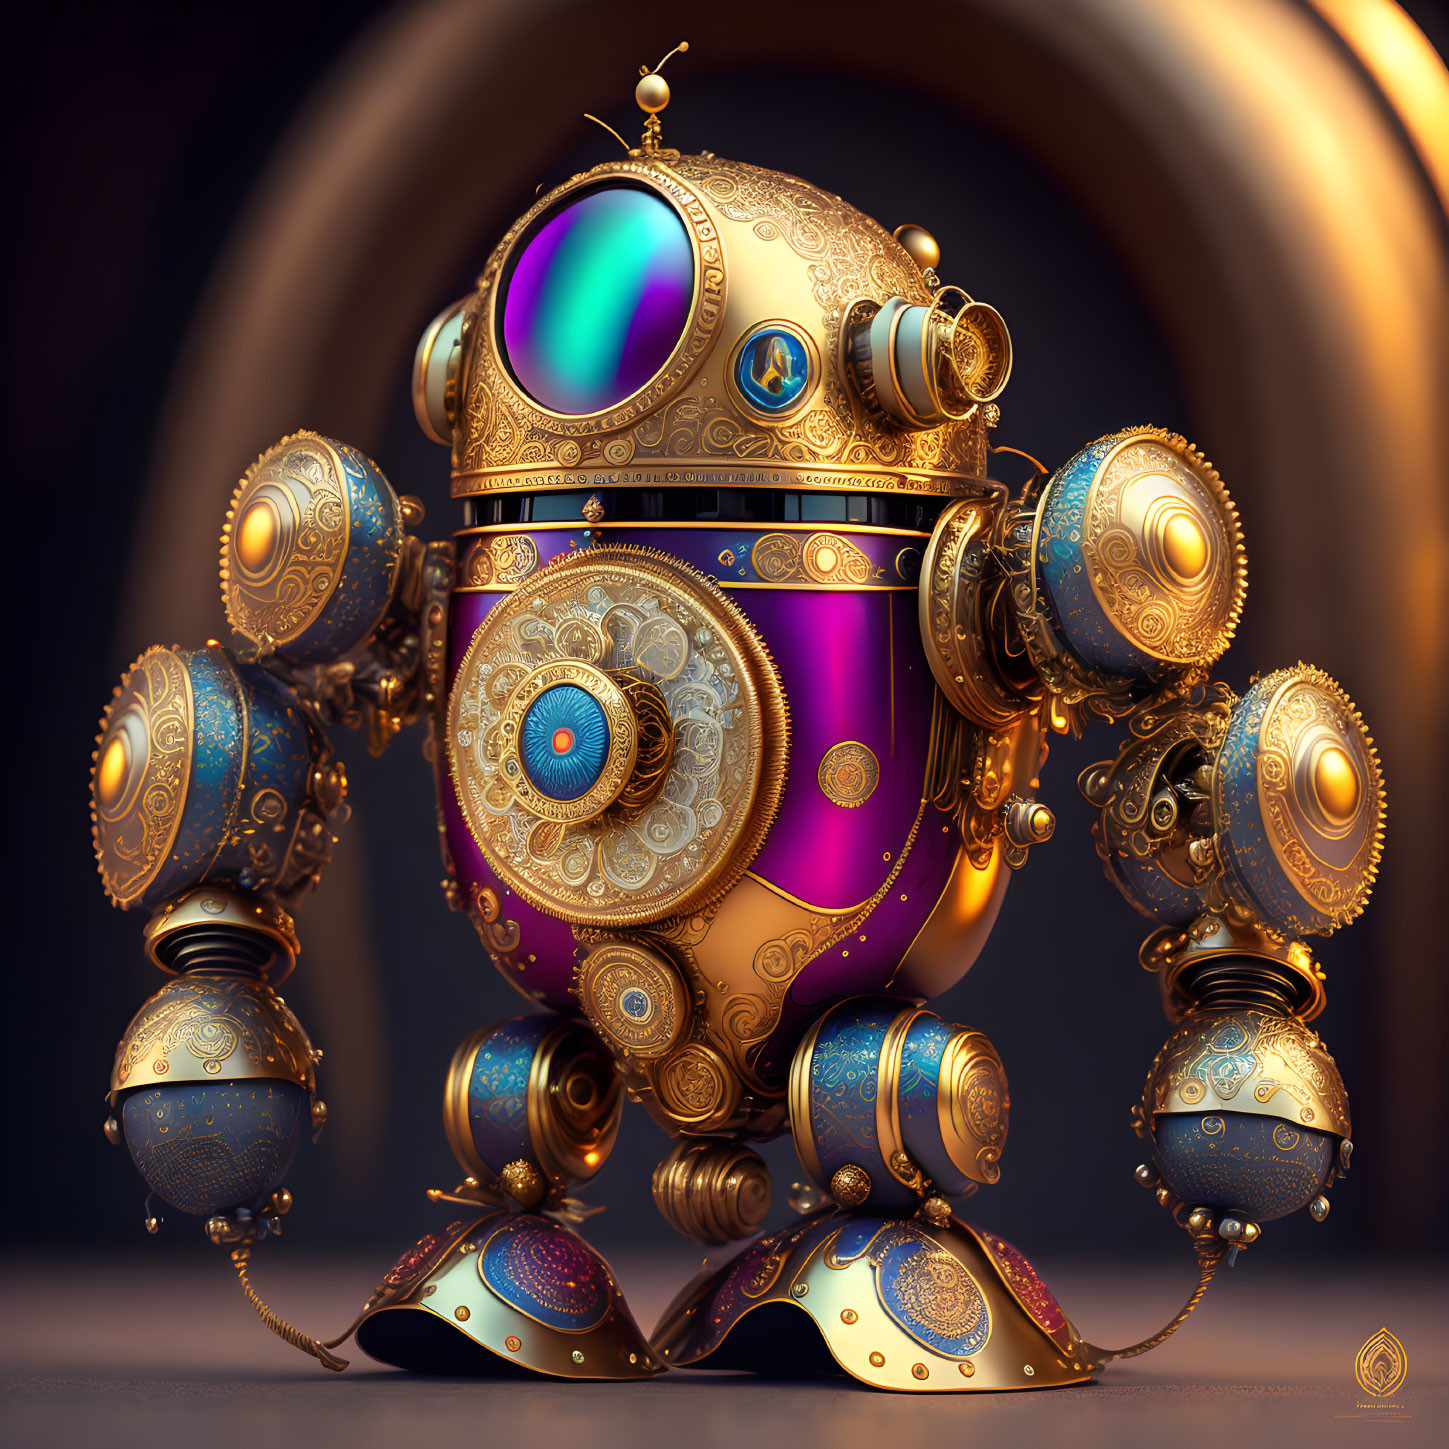 Intricate Steampunk Robot with Gold, Purple, and Blue Designs